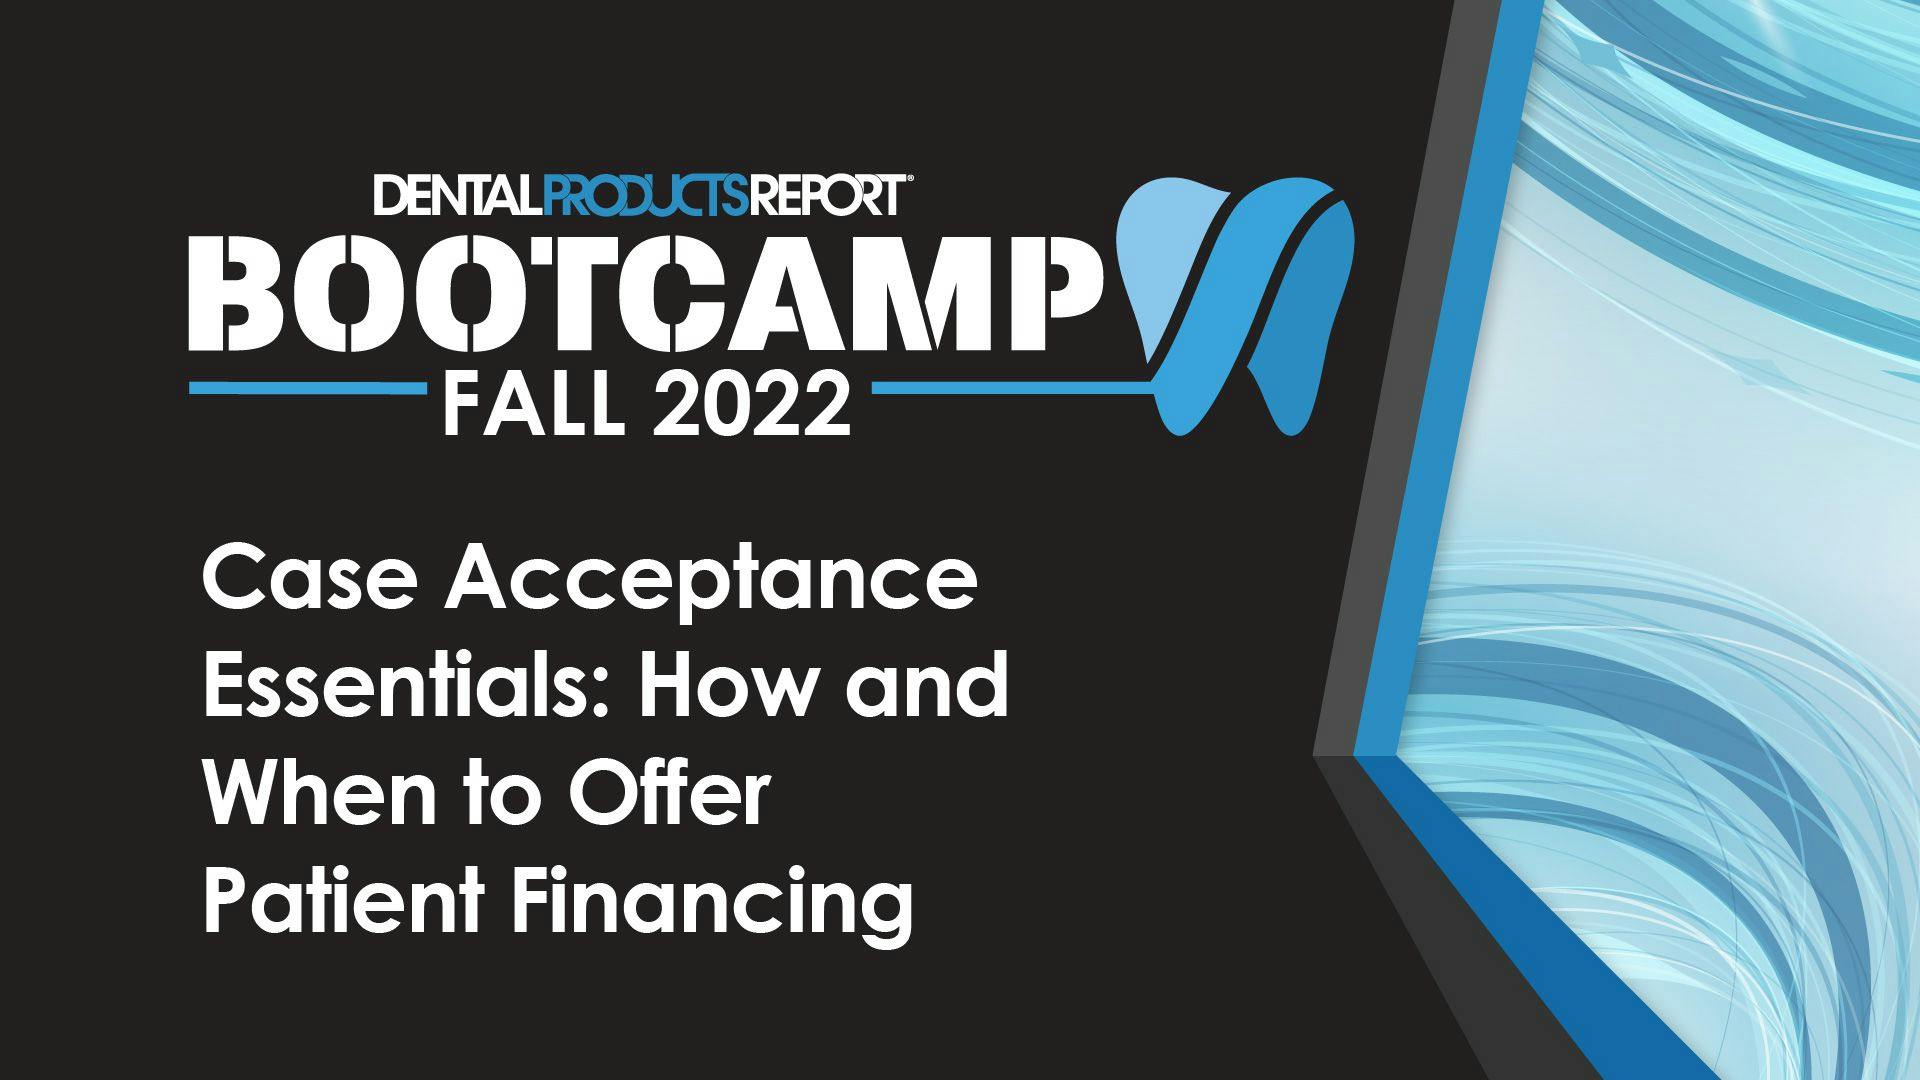 Dental Products Report Bootcamp Fall 2022 Case Acceptance Essentials: How and When to Offer Patient Financing